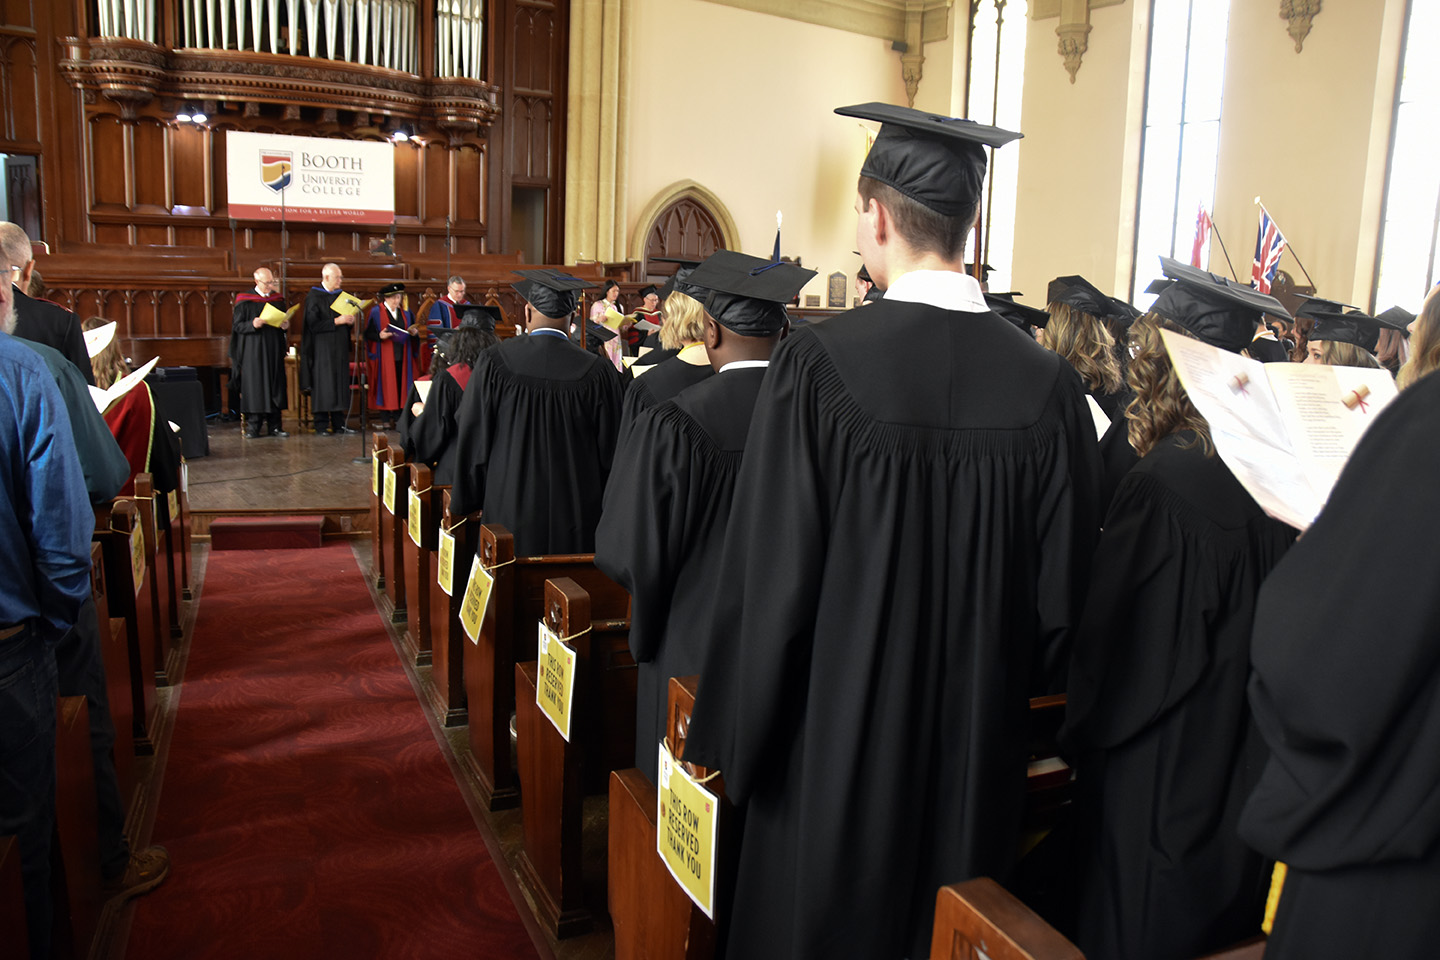 Graduates stand in their caps and gowns during a graduation ceremony.